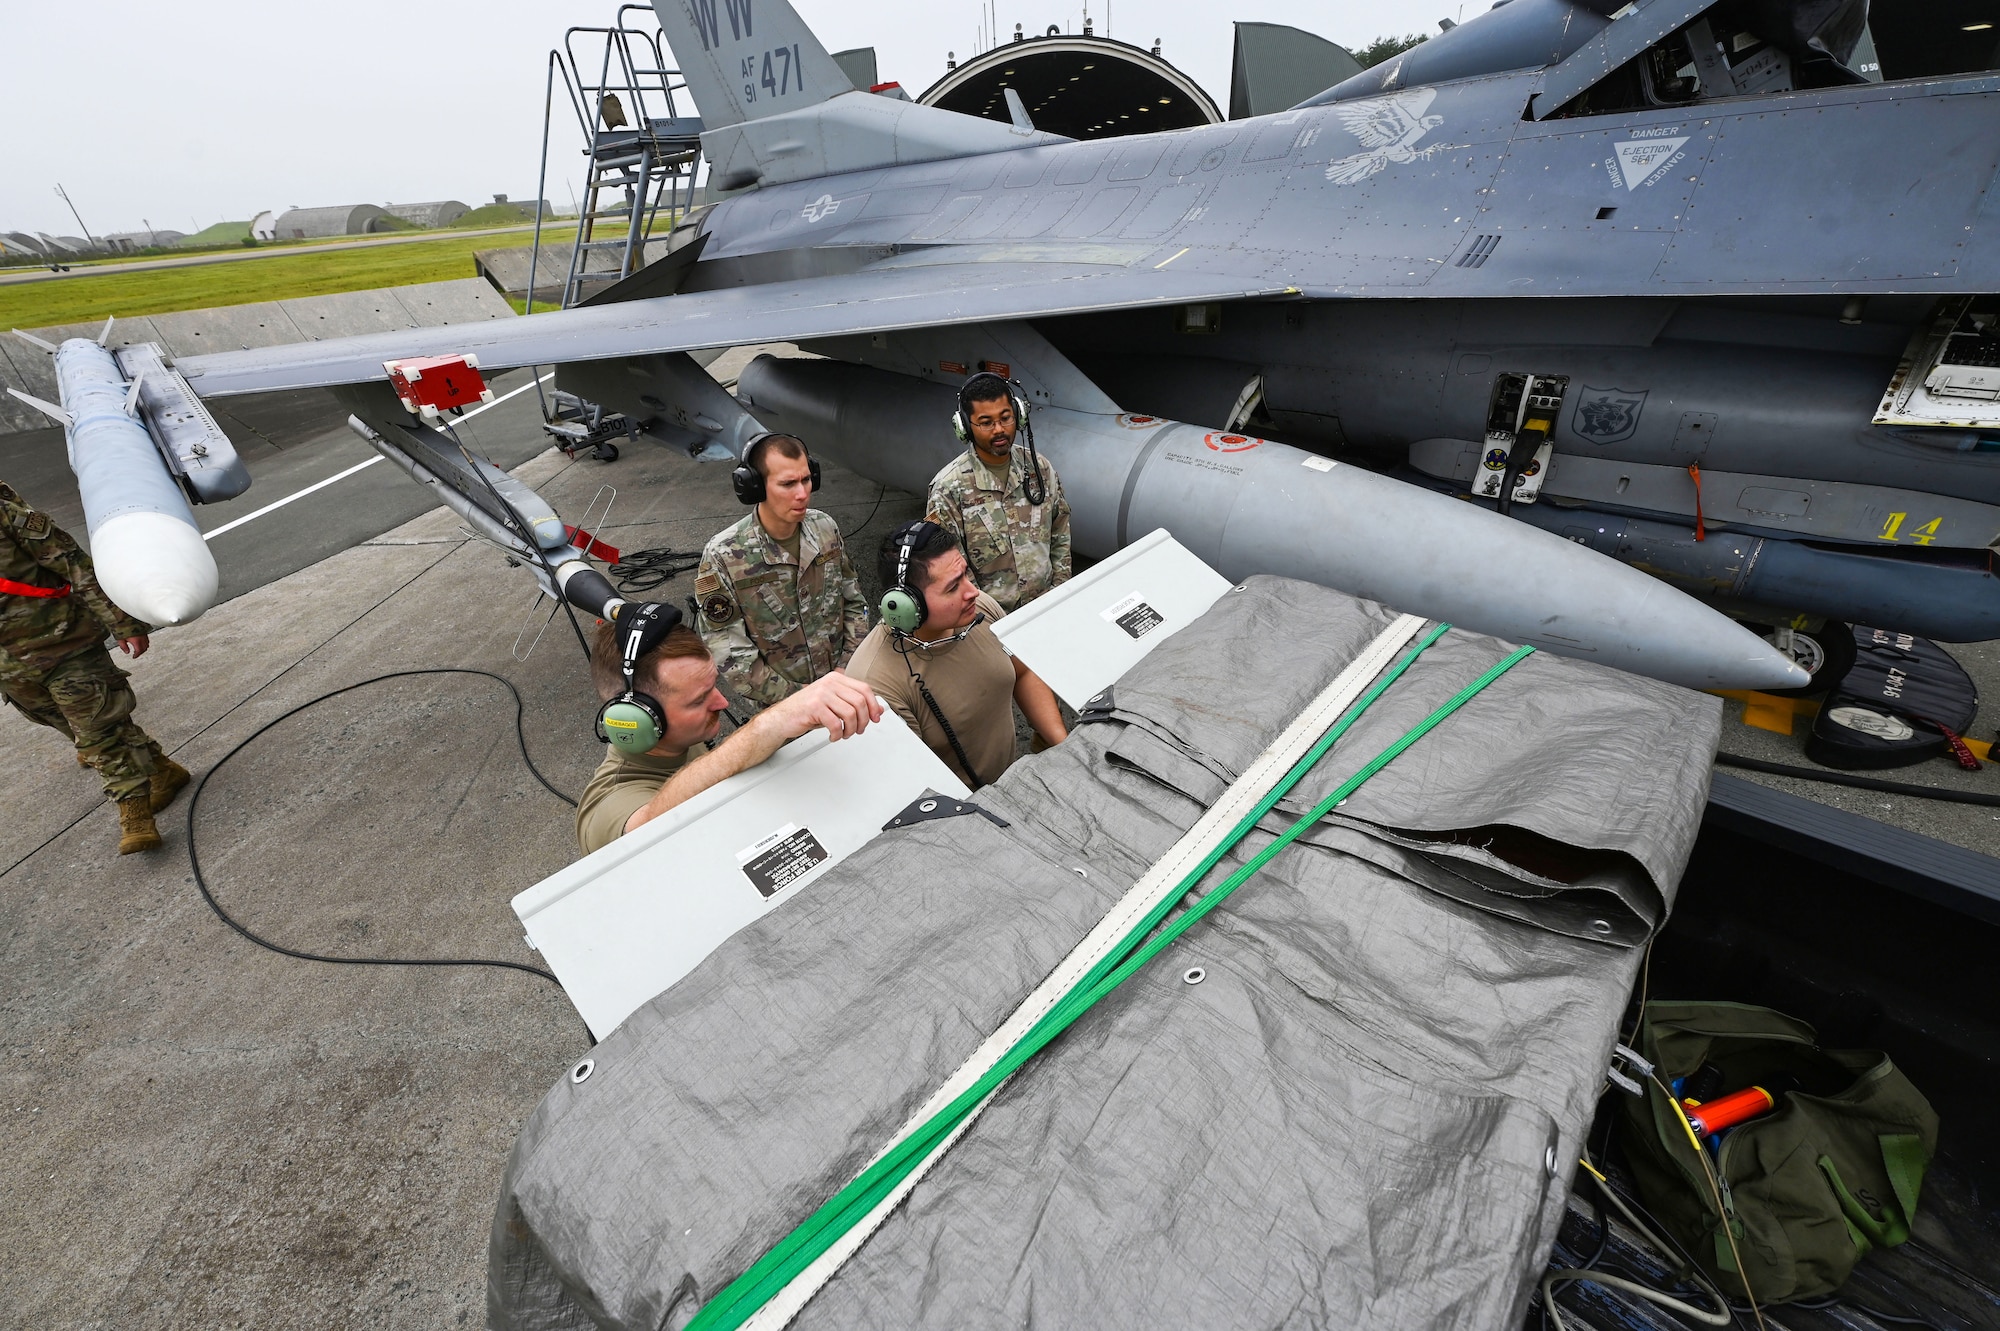 Airmen assigned to 87th Electronic Warfare Squadron Combat Shield assess the defensive system readiness of a U.S Air Force F-16 Fighting Falcon at Misawa Air Base, Japan, Aug. 8, 2023. Combat Shield is the lead U.S. Air Force air electronic warfare (EW) assessment program and is responsible for advising all MAJCOM-specific EW assessment programs. (U.S. Air Force photo by Staff Sgt. Ericka A. Woolever)